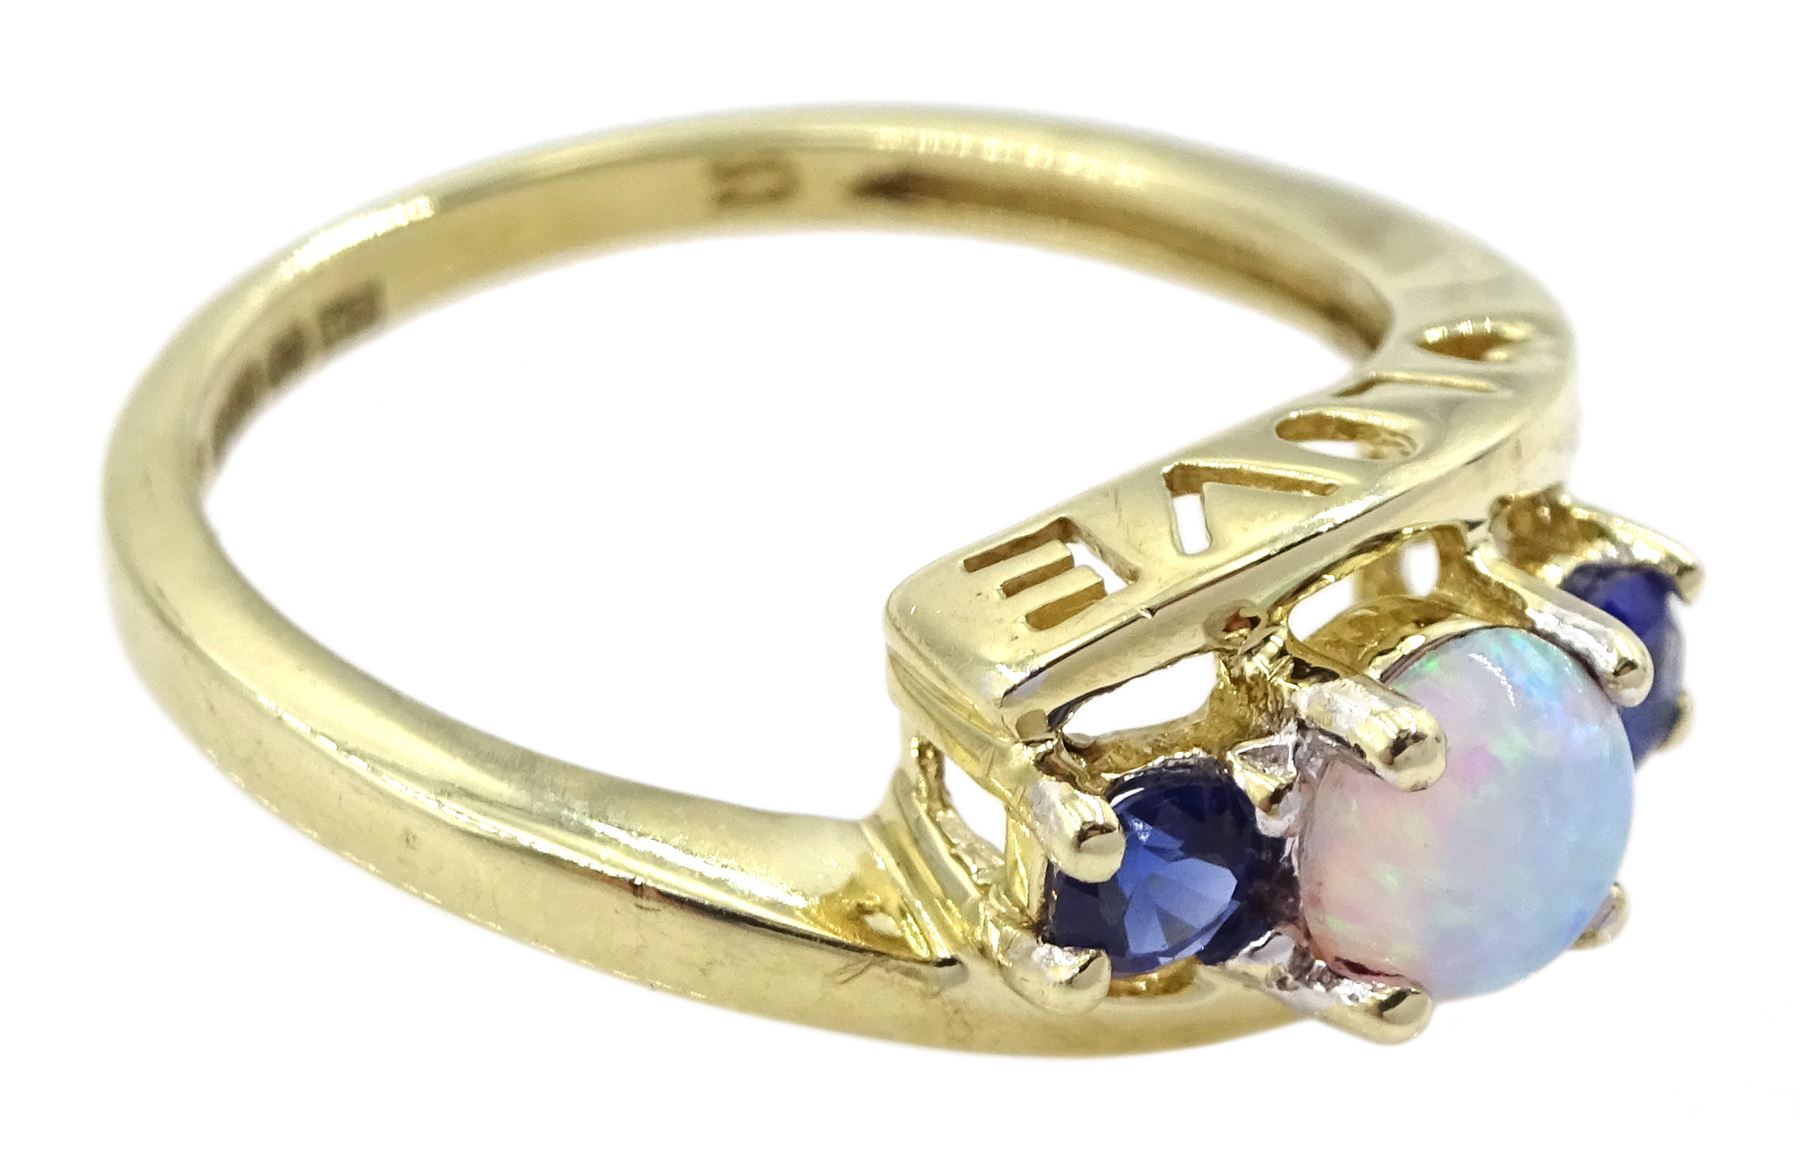 9ct gold opal and sapphire ring with 'love' gallery - Image 3 of 7